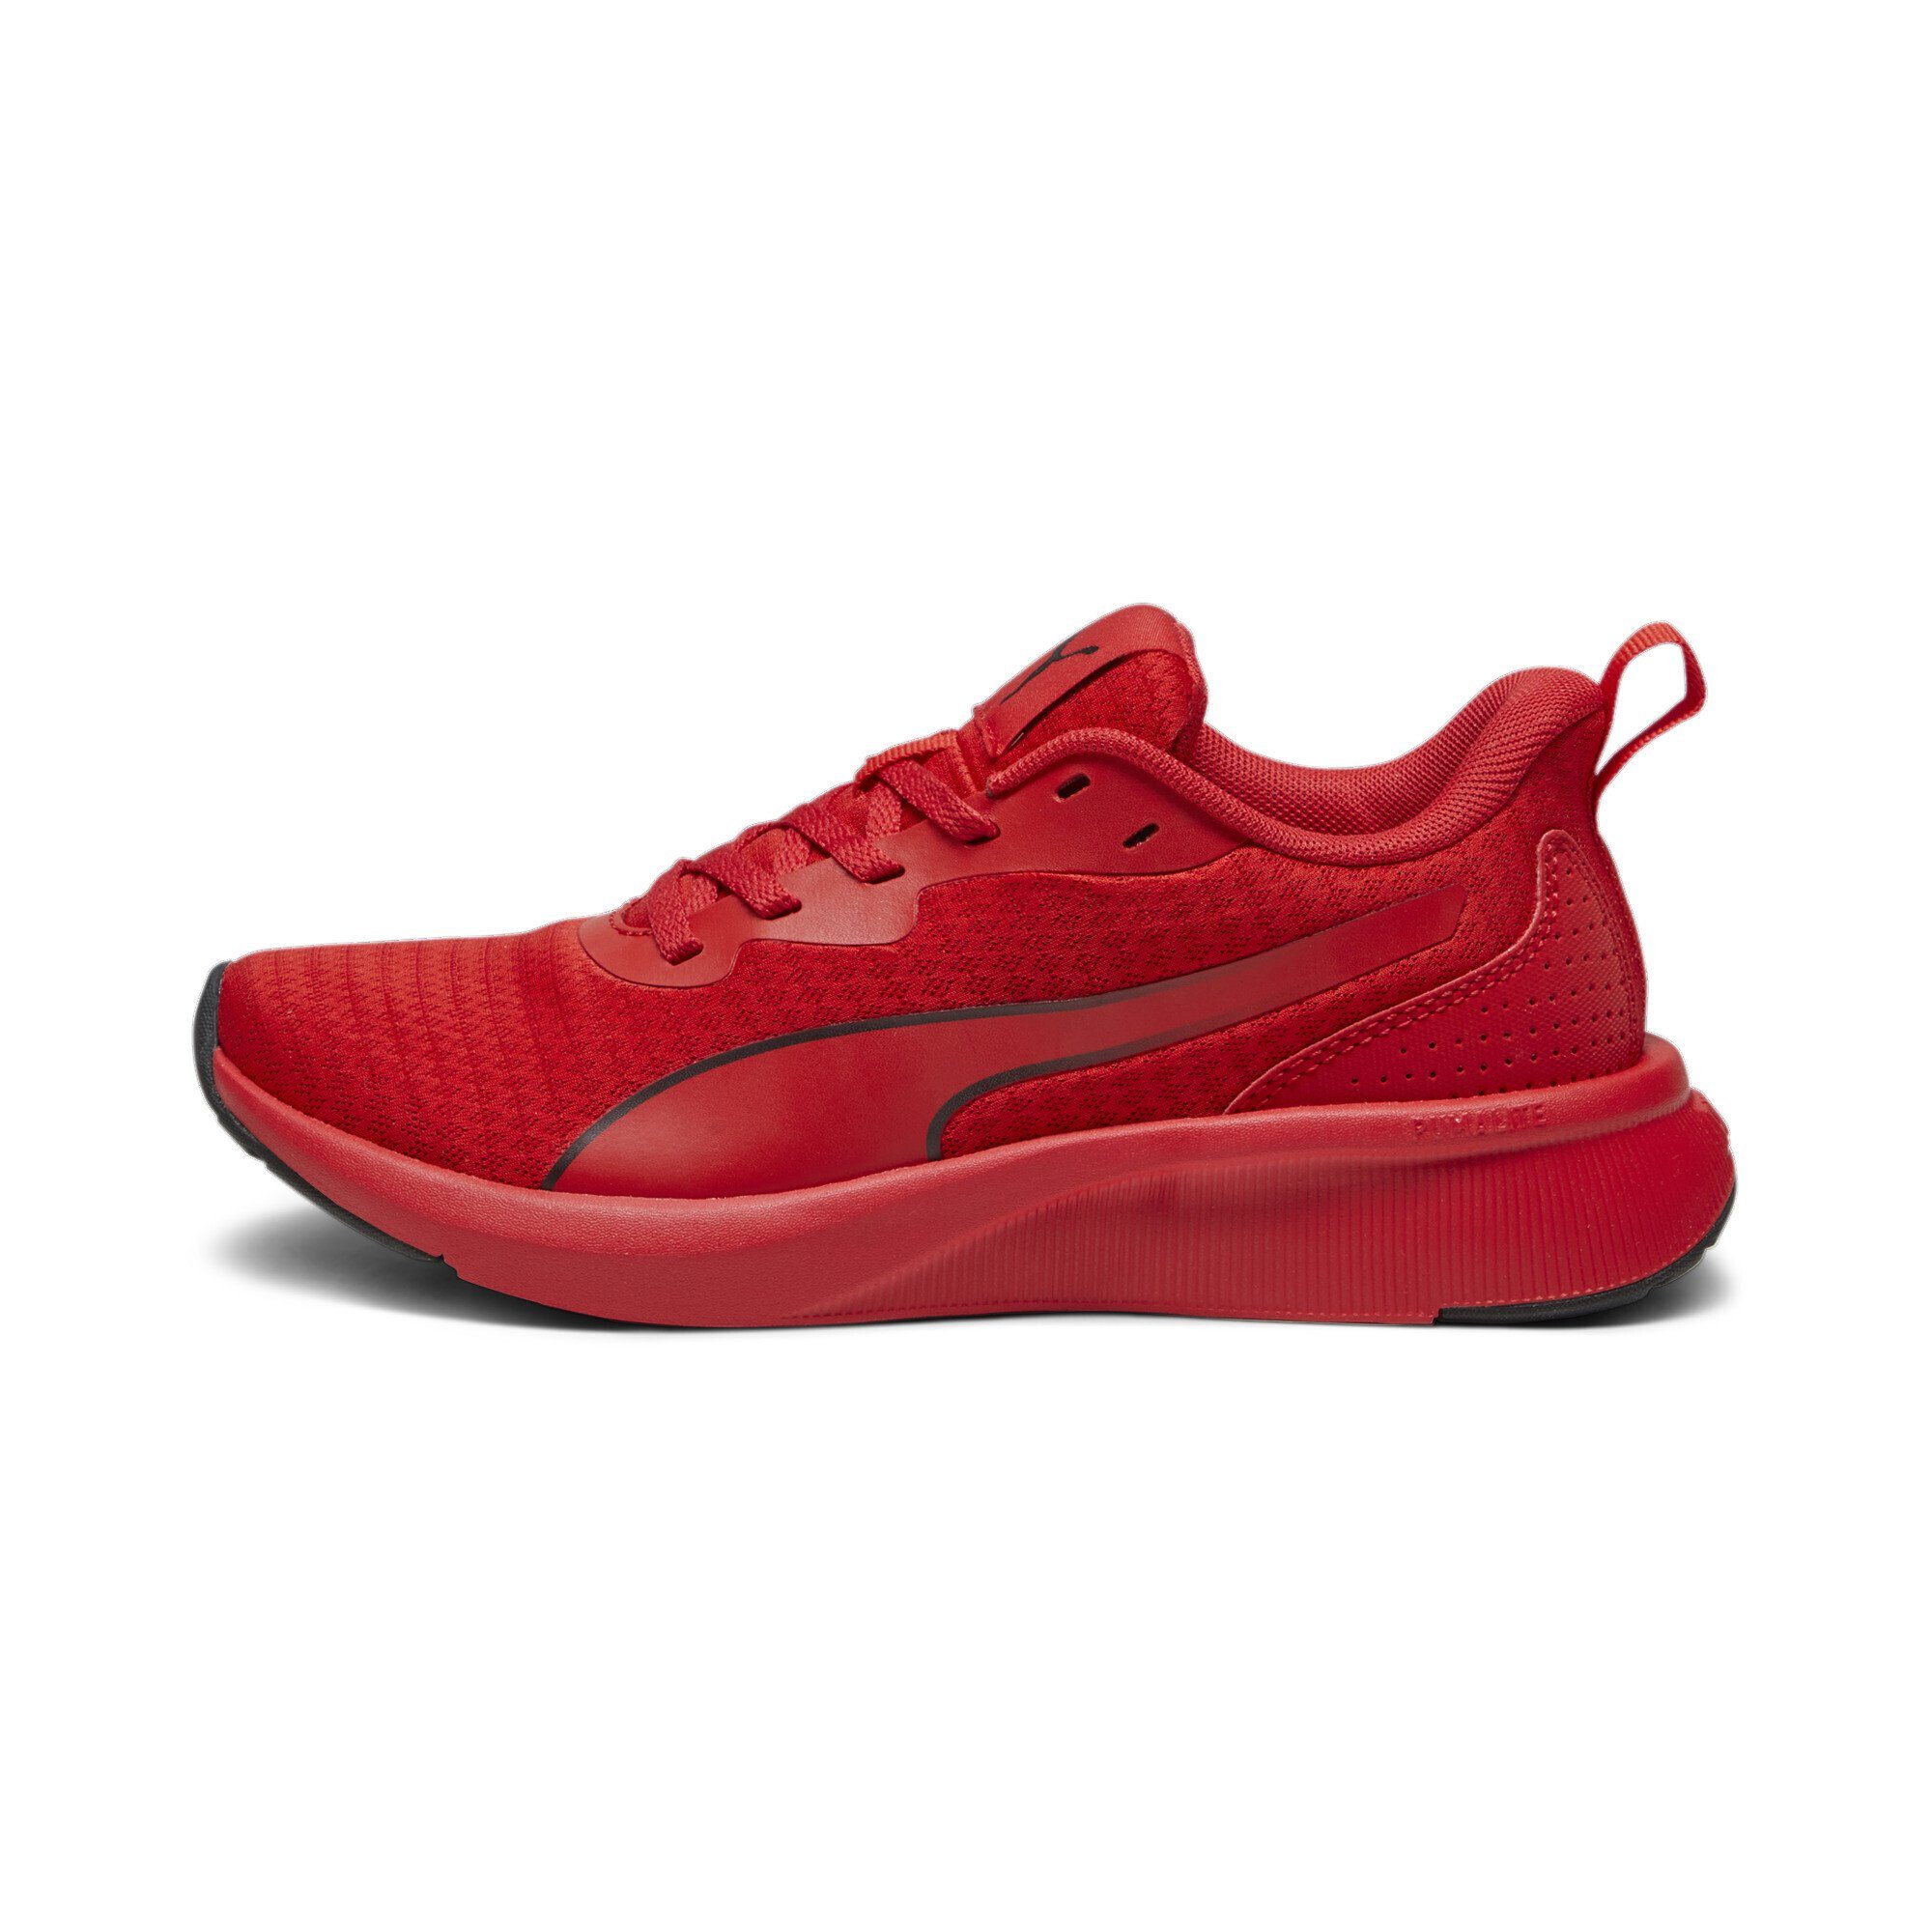 Lite Time PUMA Flyer Trainingsschuh All Red For Sneakers Black Jugendliche